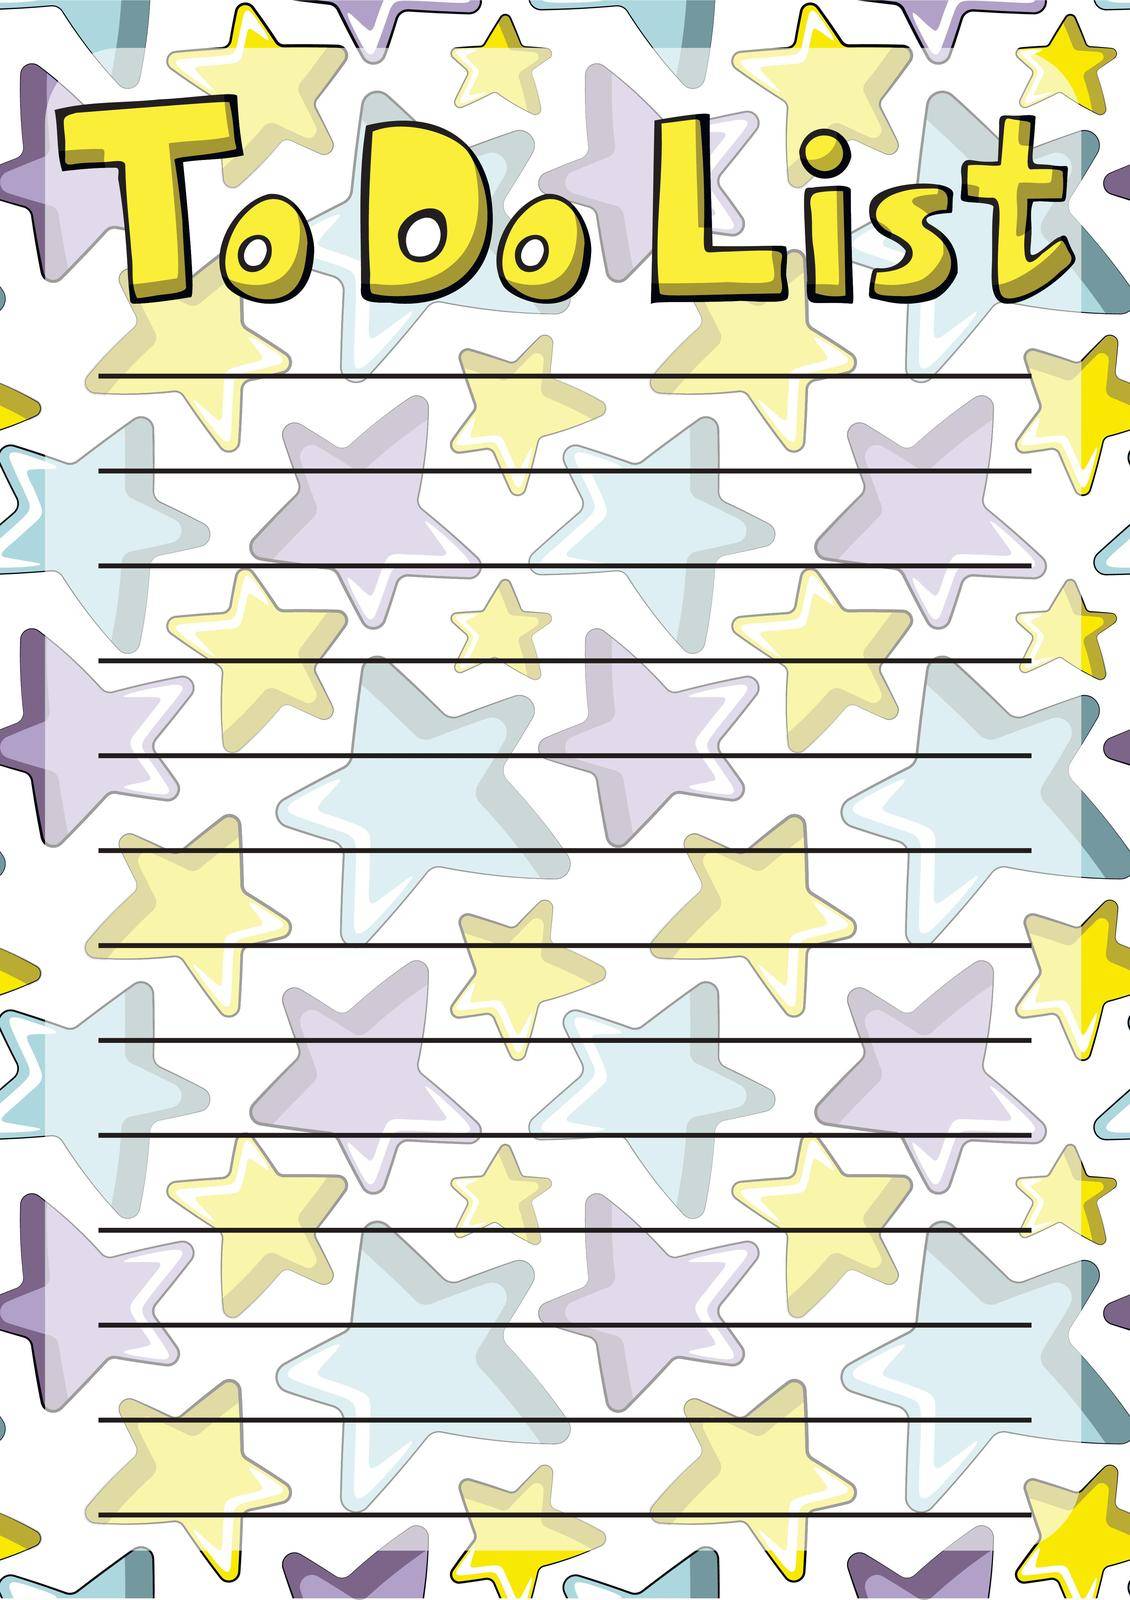 Cheek To do list with color star by AnastasiaPen